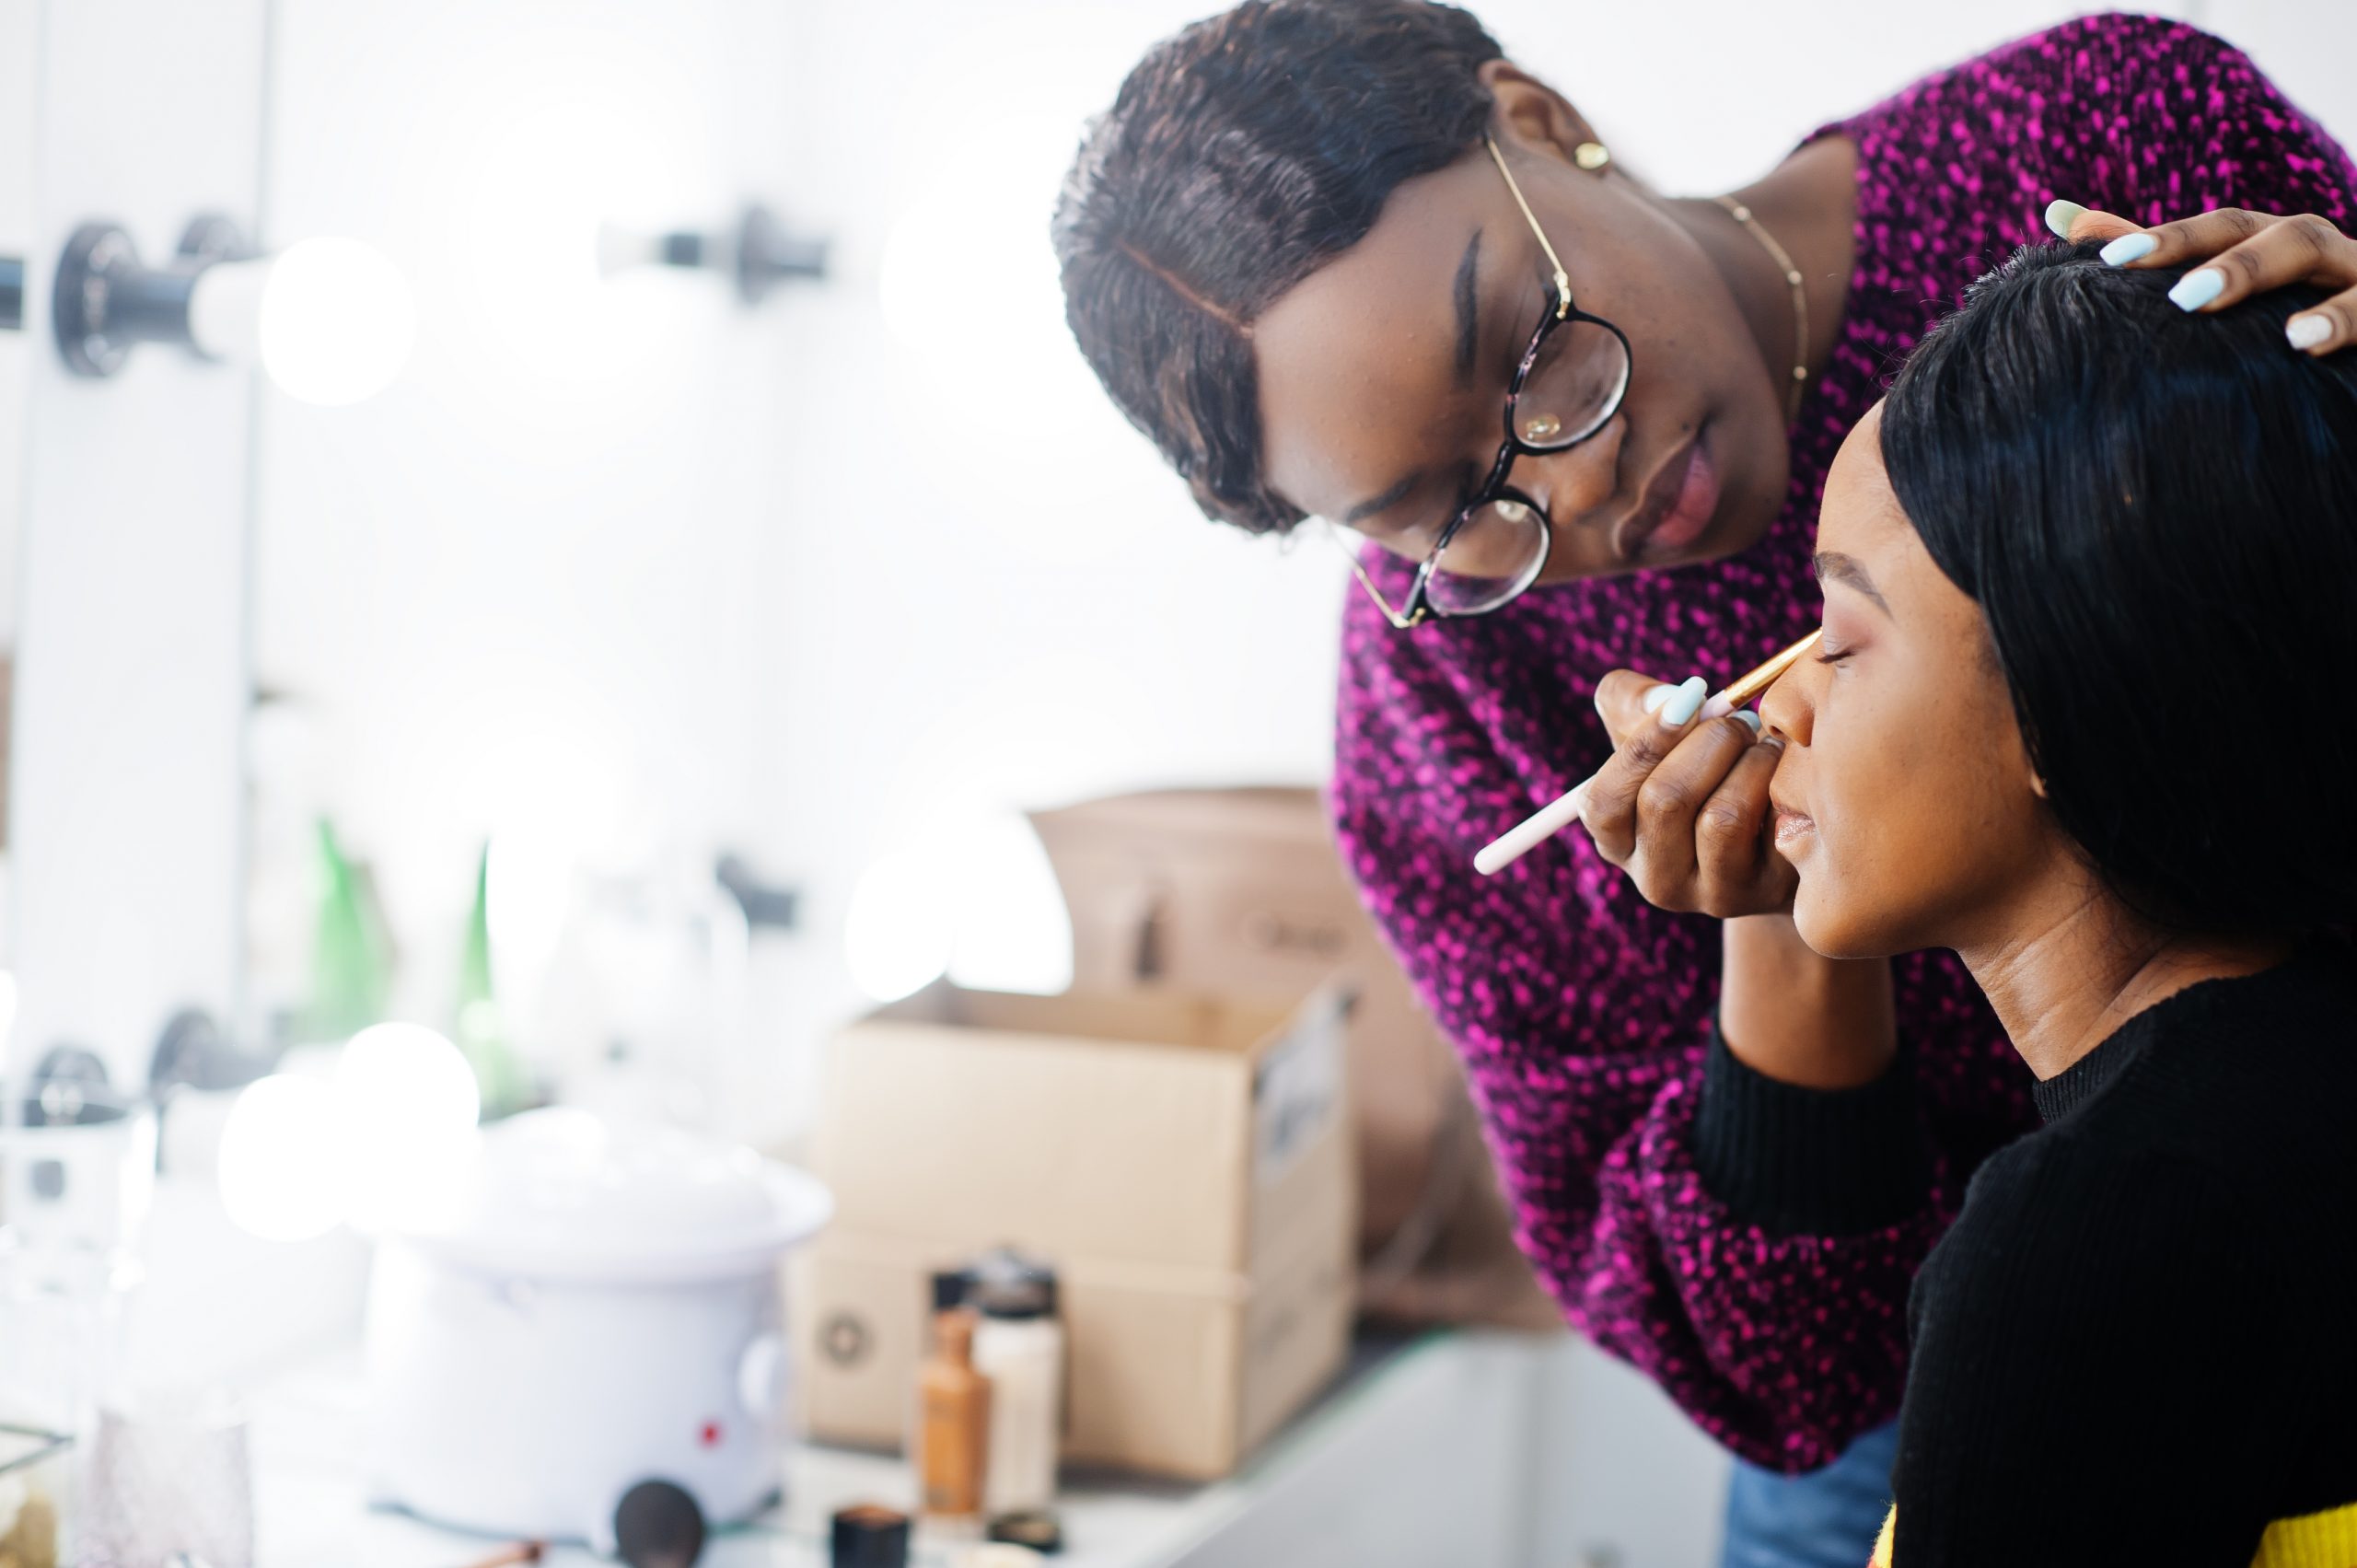 Sephora has partnered with the Fifteen Percent Pledge to create a new $100,000 grant for Black entrepreneurs in the beauty sector.